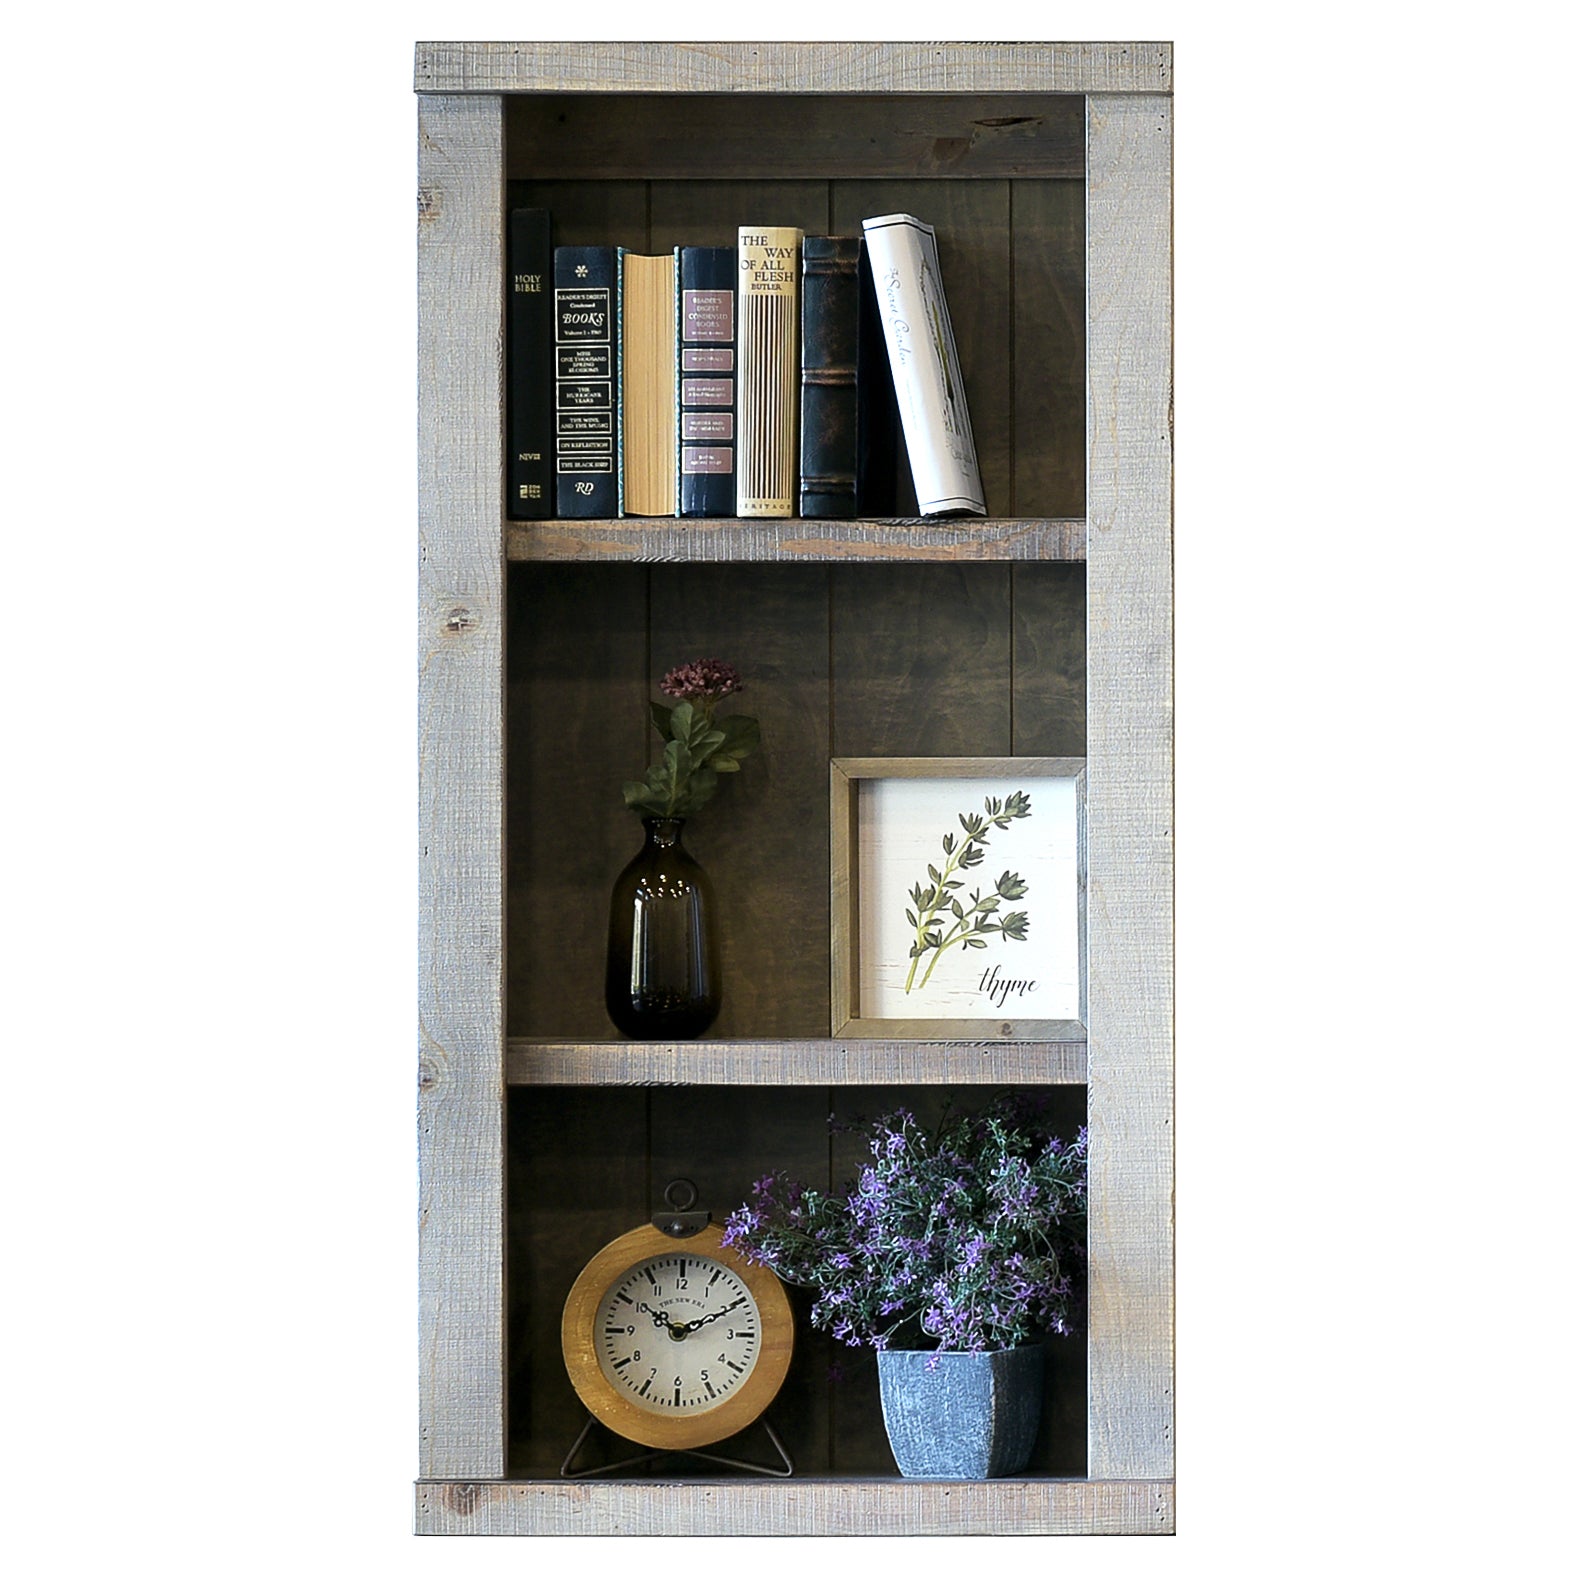 Floating Bookshelf - Woodwaves - Rustic Wood Wall Mount Storage Bookcase - Farmhouse Collection - Lakewood Gray